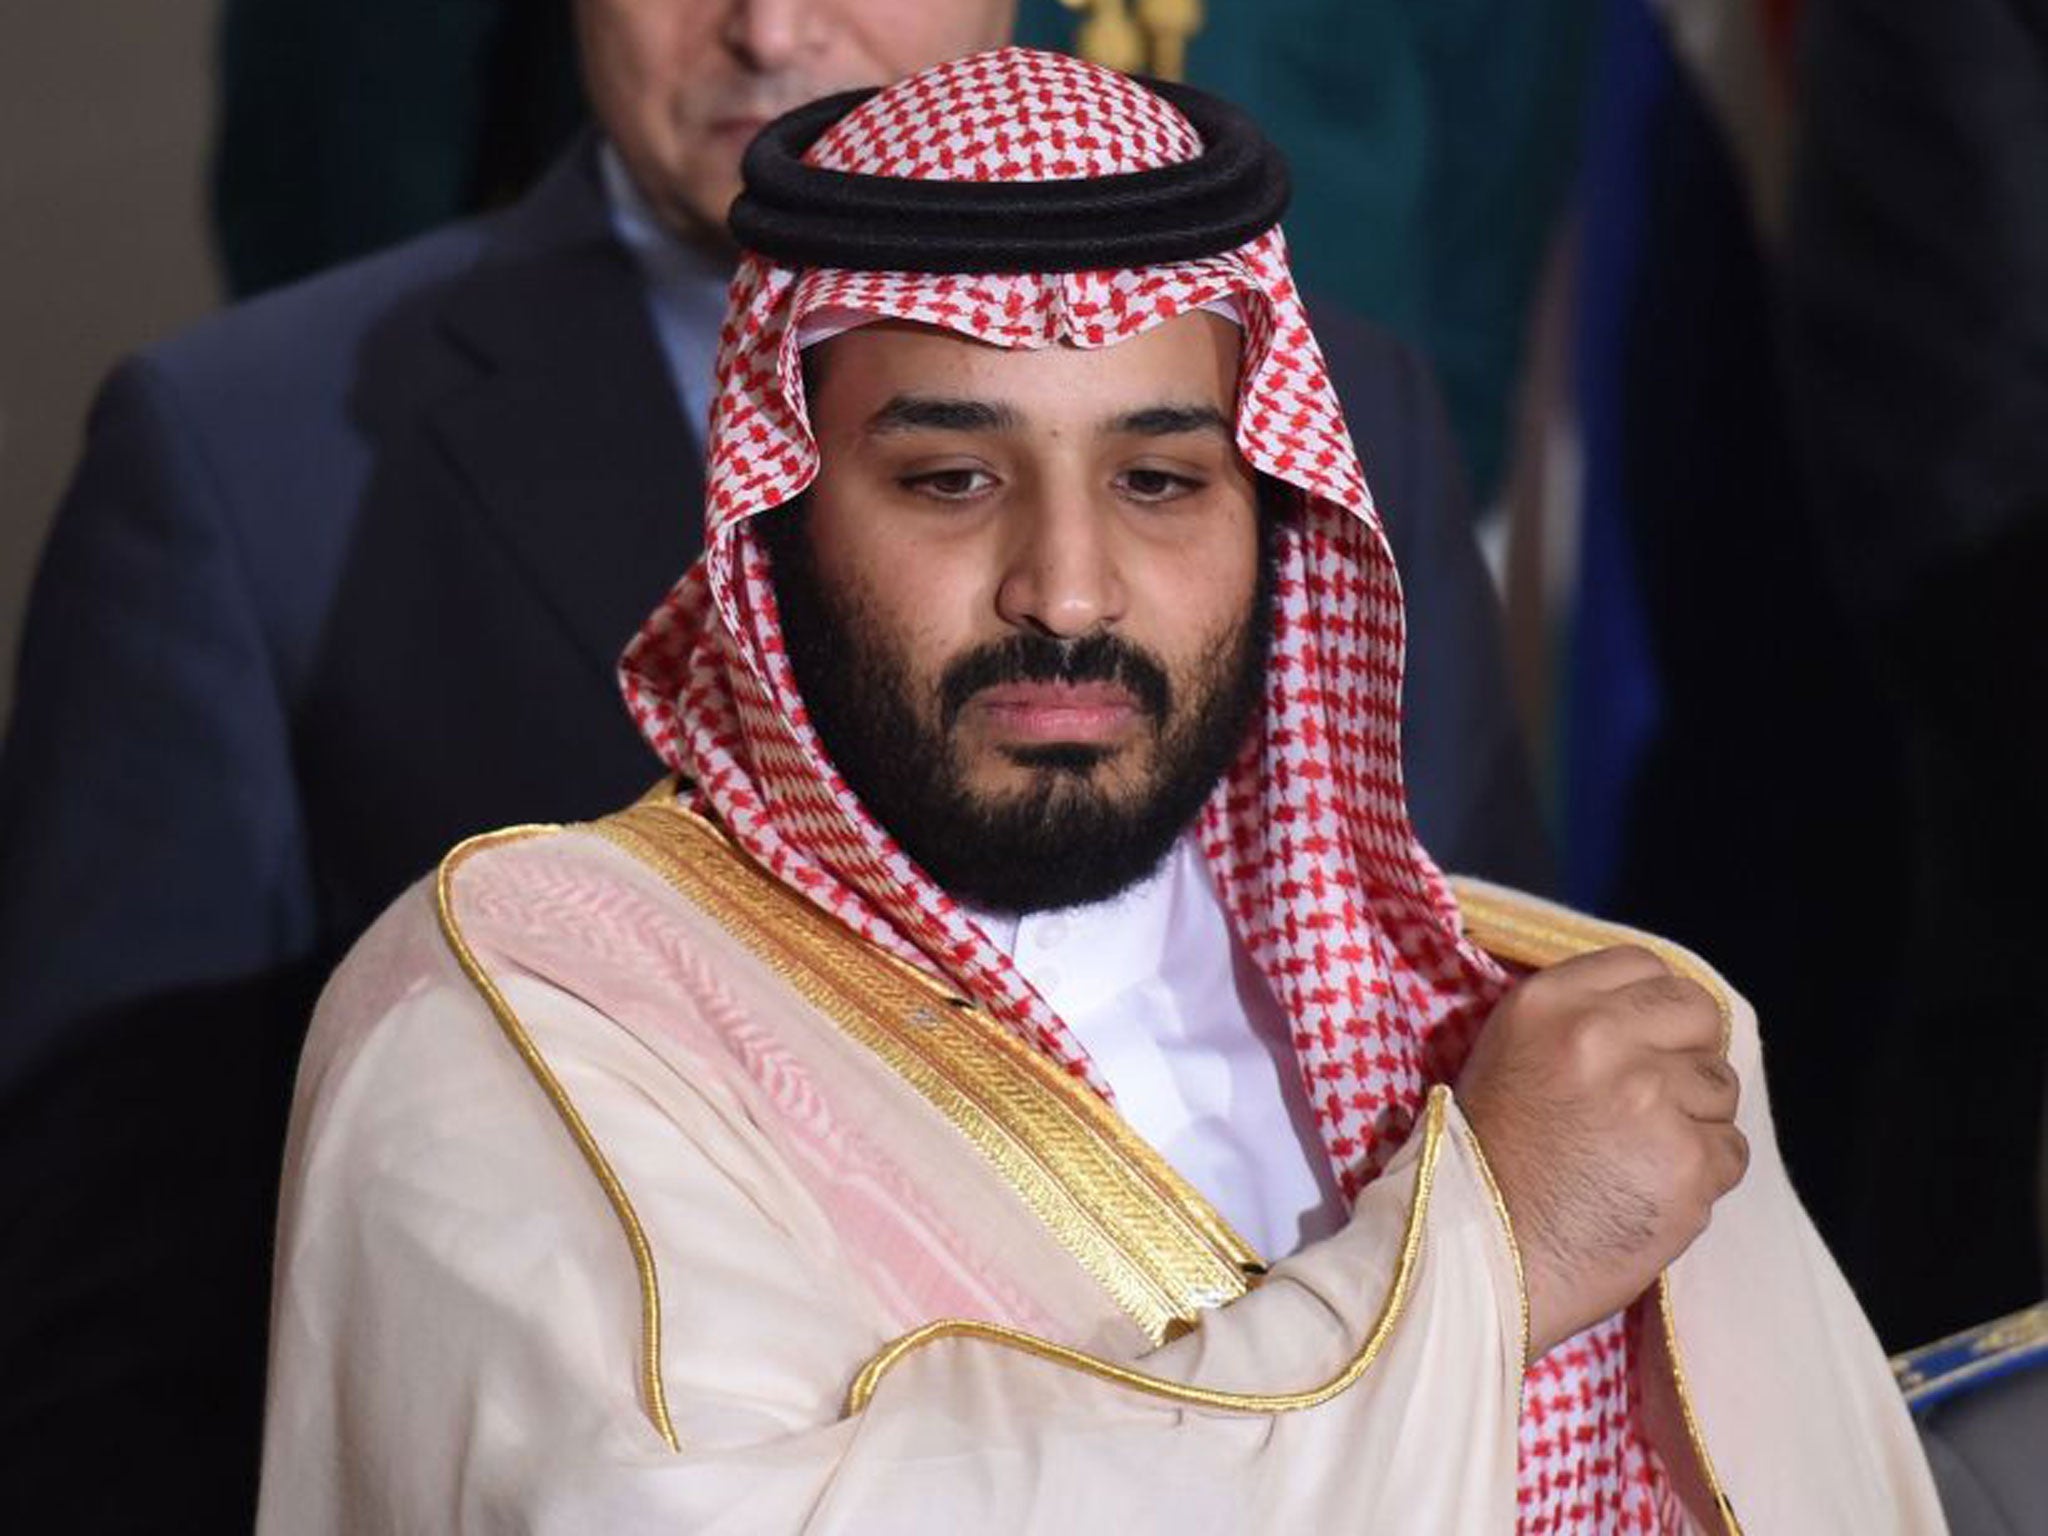 The Crown Prince is dealing with a Western power, in this case the Brits. And the only advice he should be given in such circumstances is: mind your back